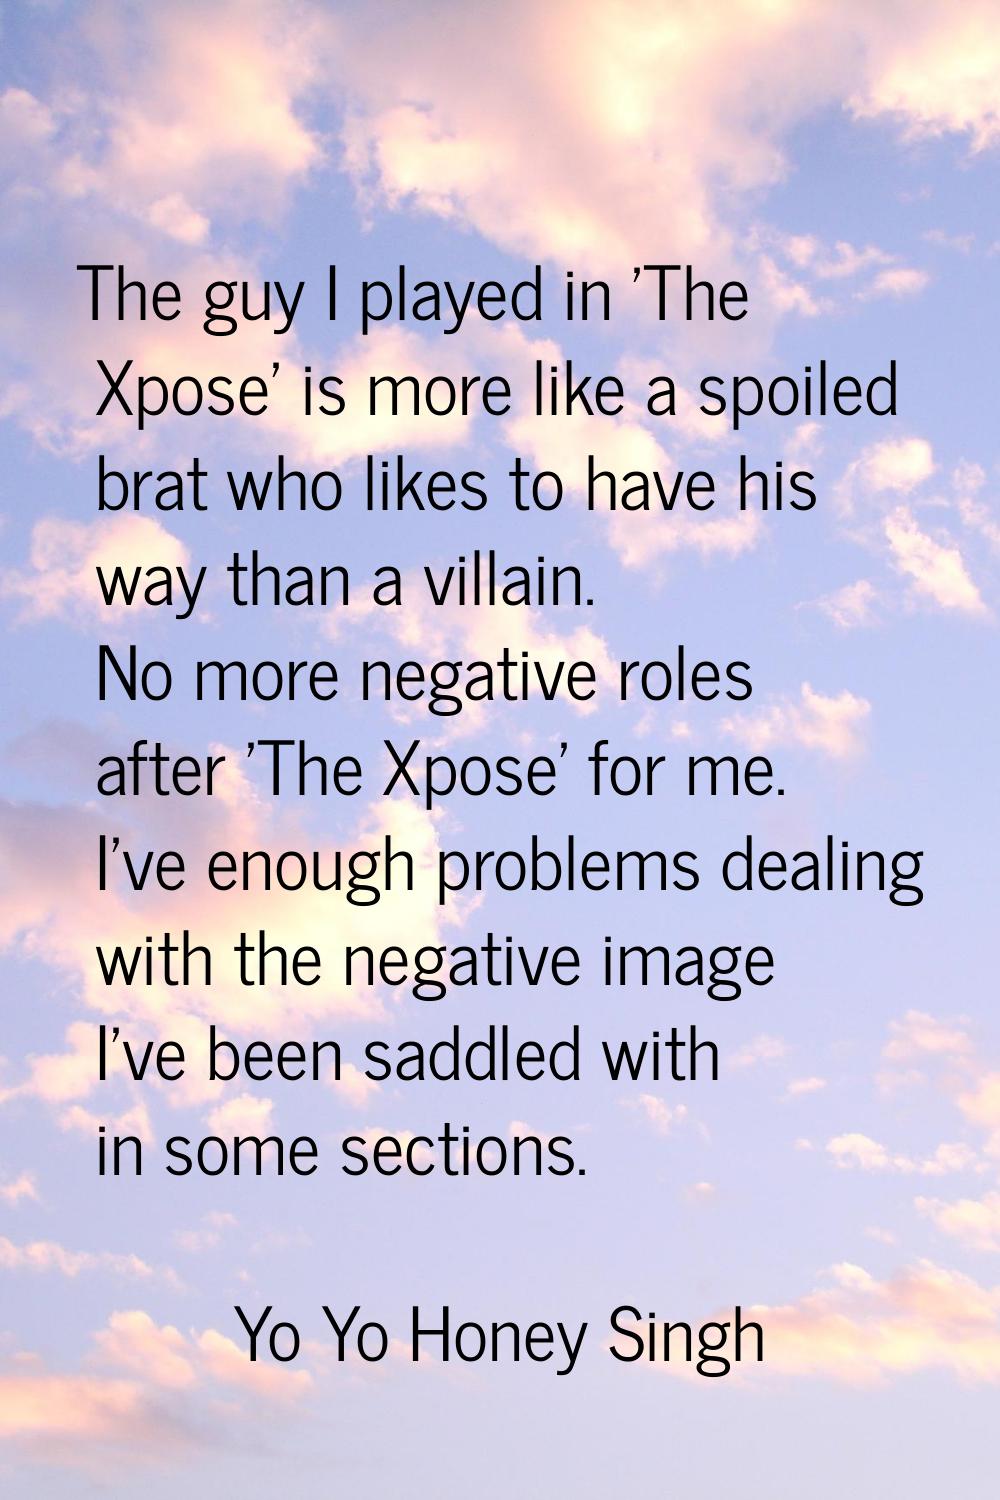 The guy I played in 'The Xpose' is more like a spoiled brat who likes to have his way than a villai